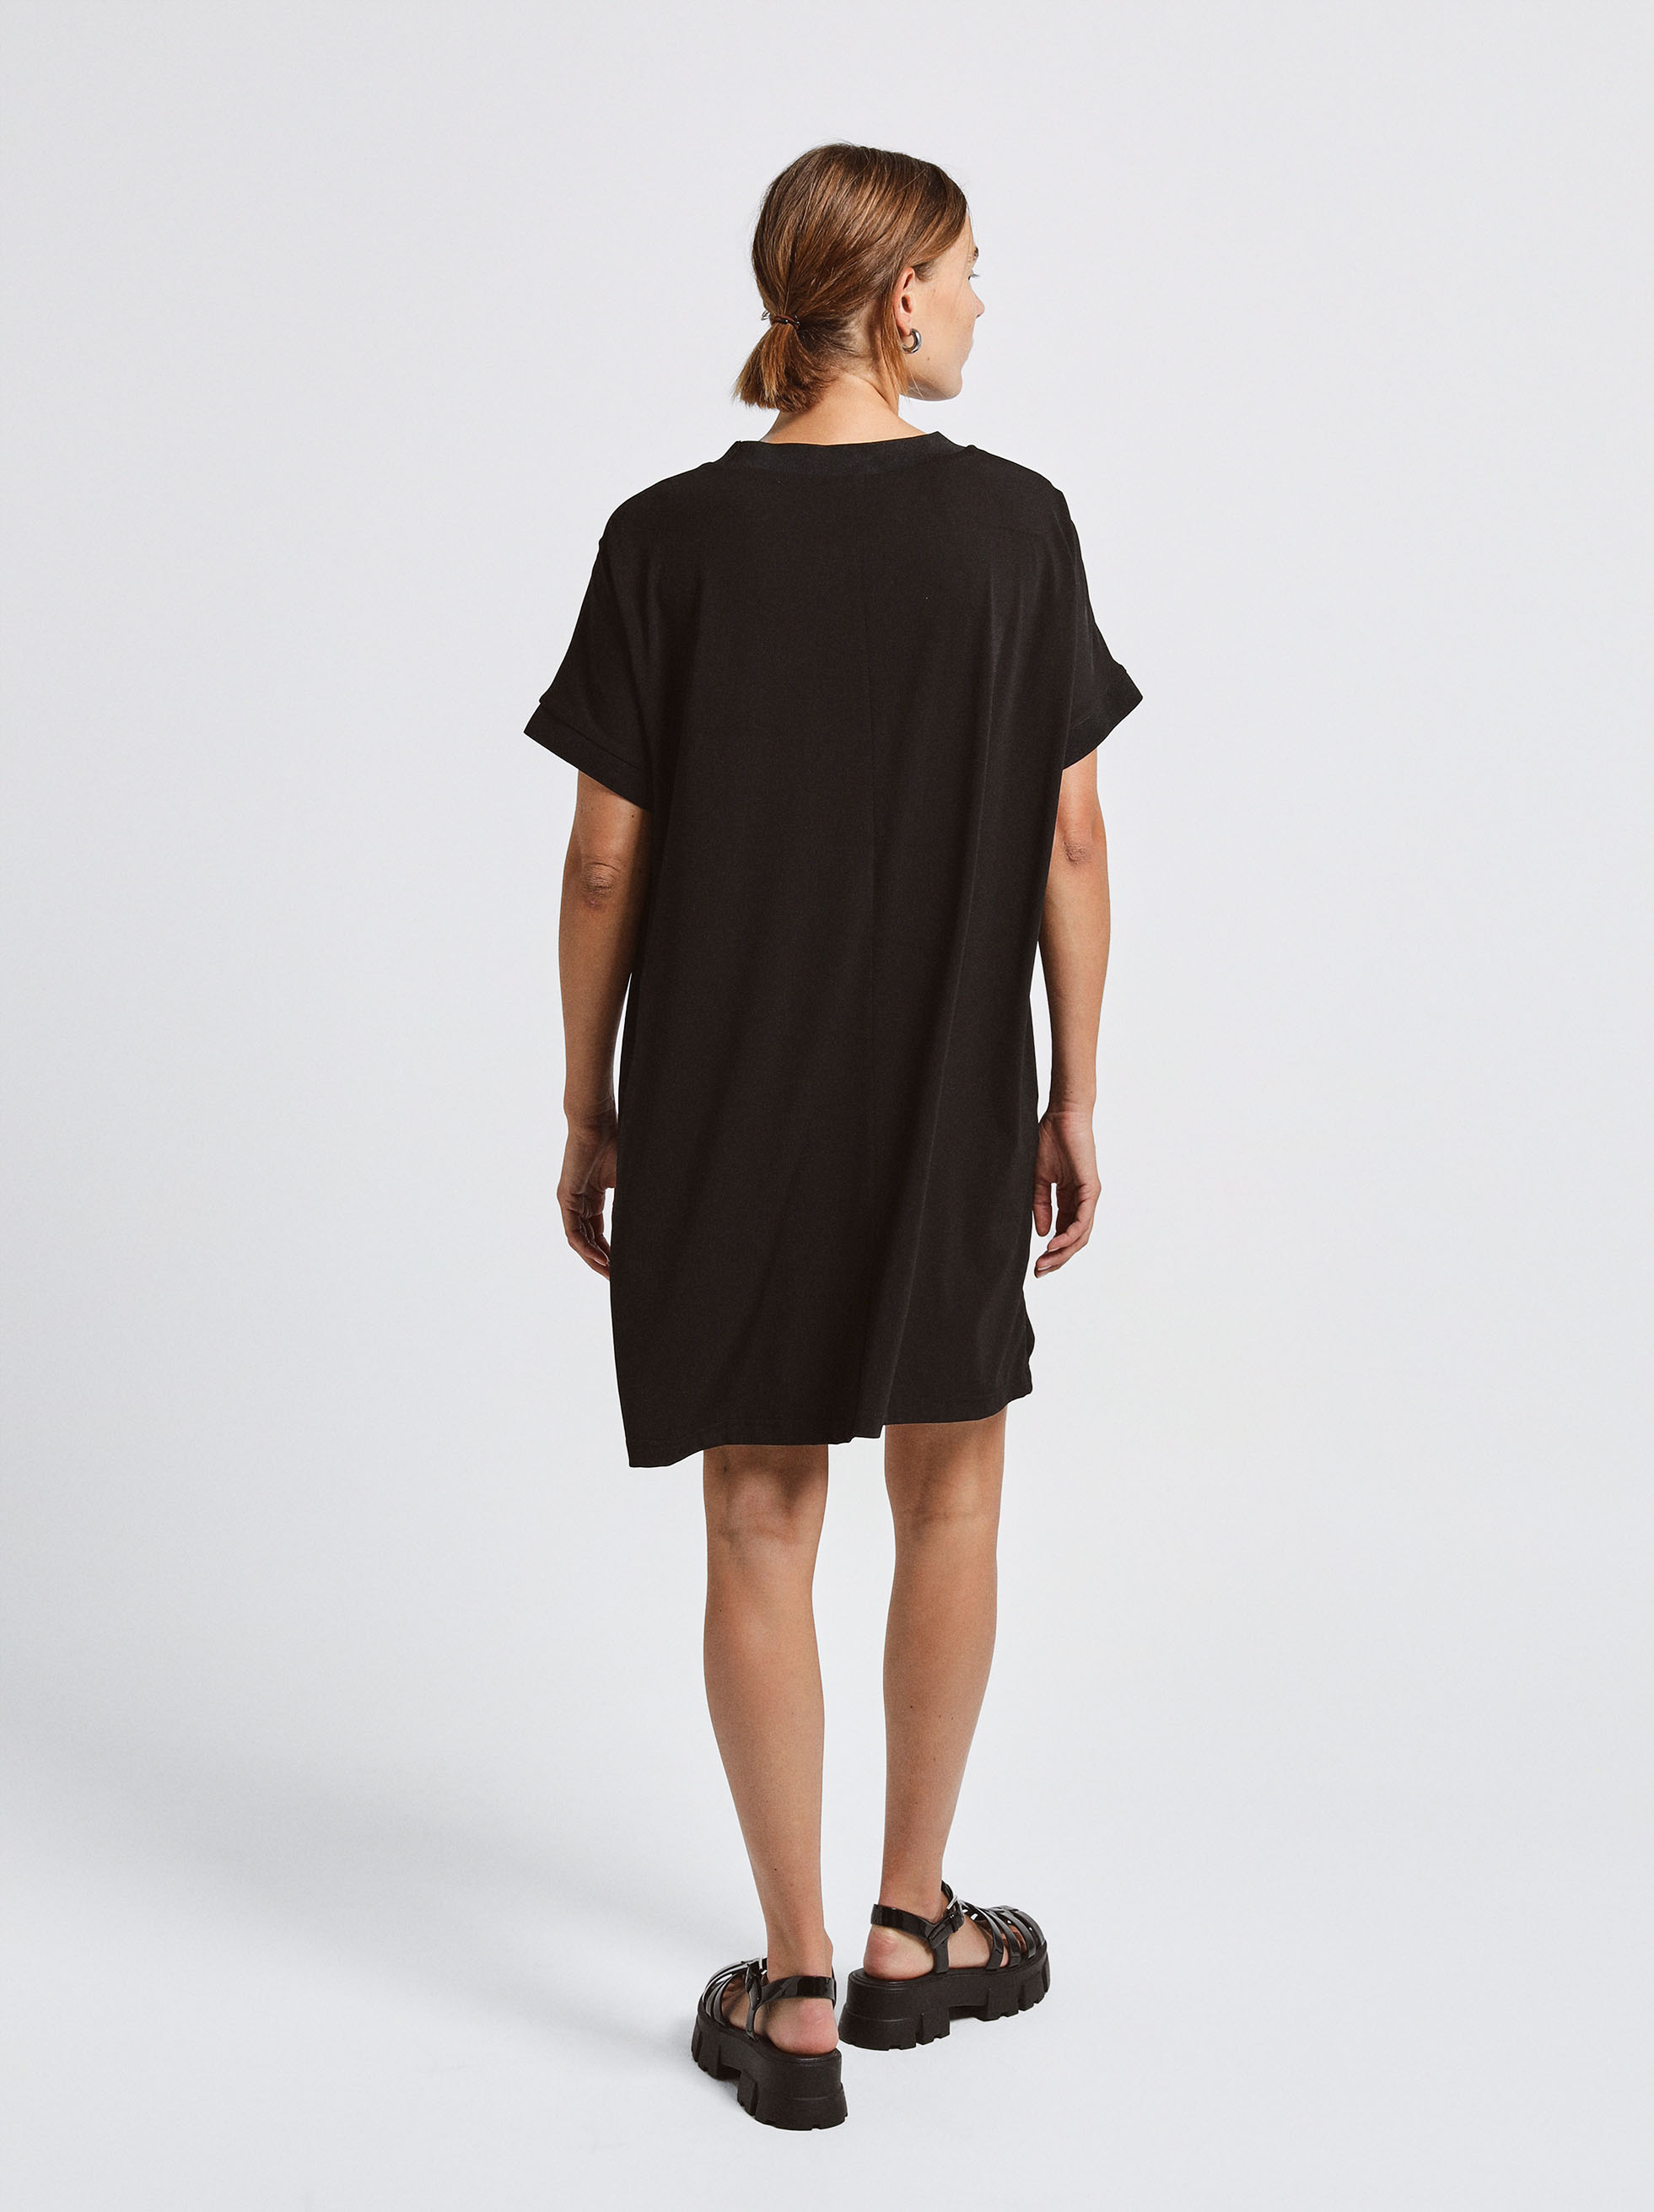 Dress With Round Neck And Short Sleeve image number 2.0